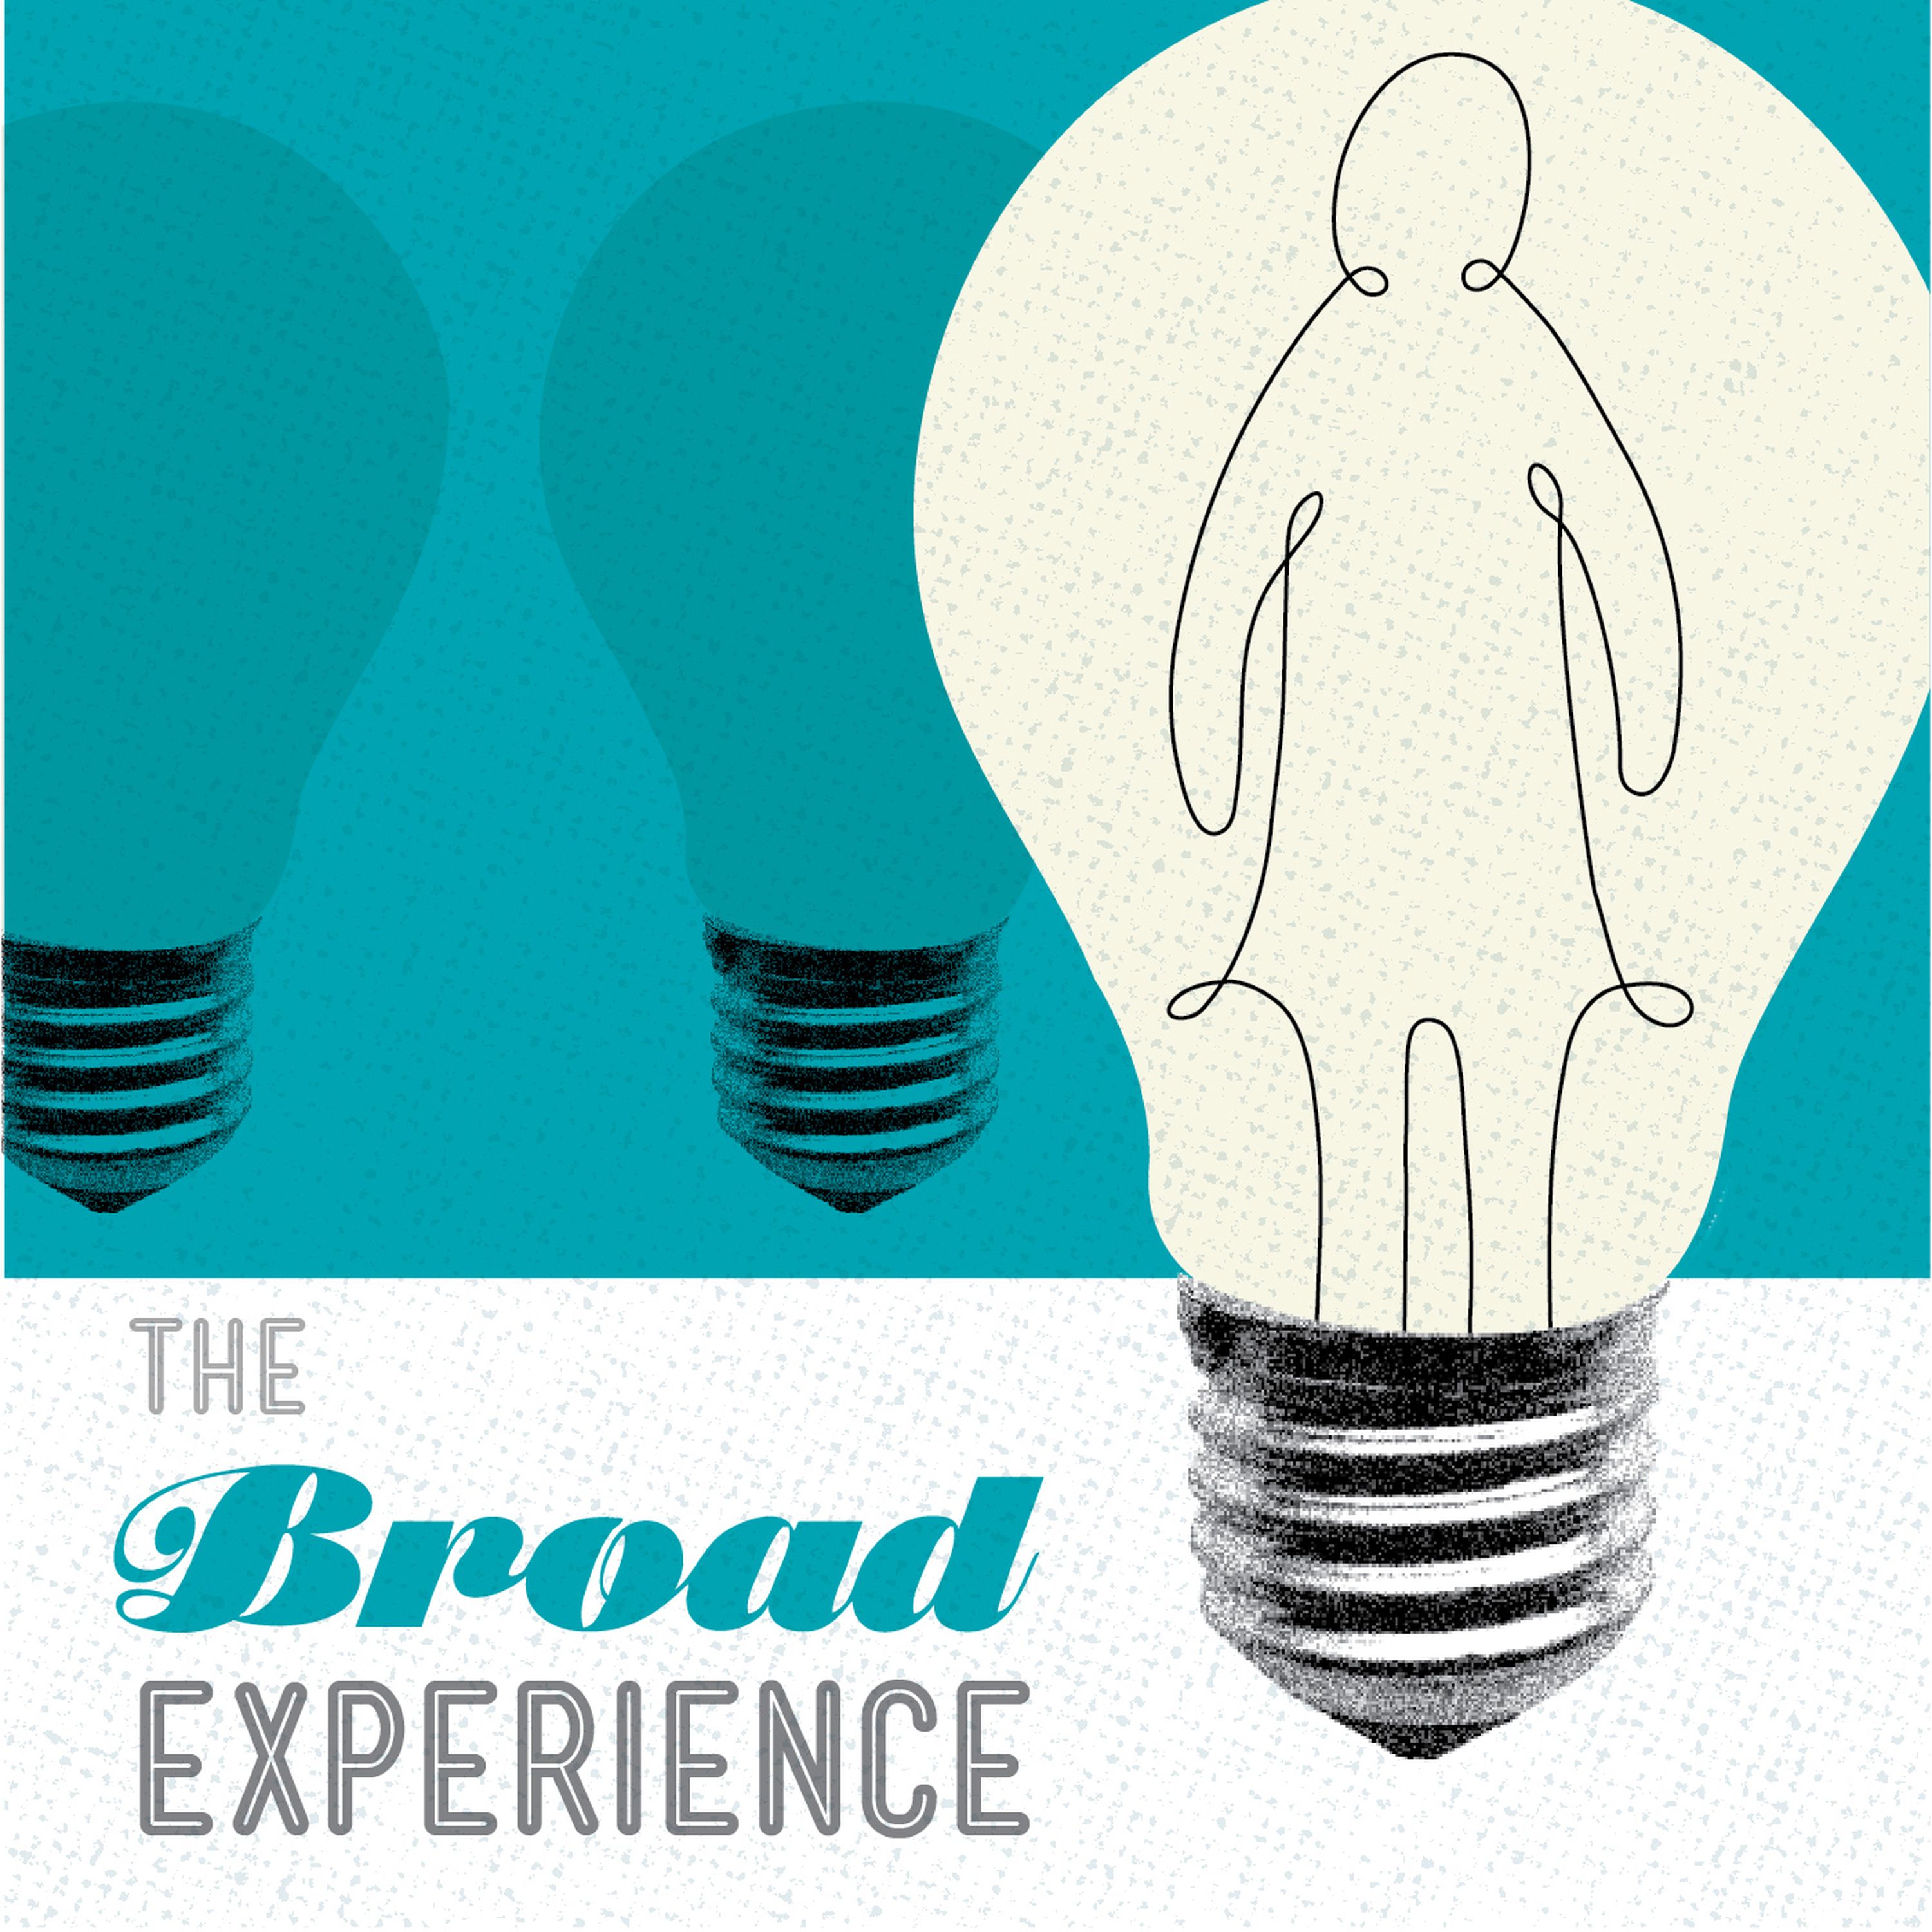 The Broad Experience 51: The curse of comparison